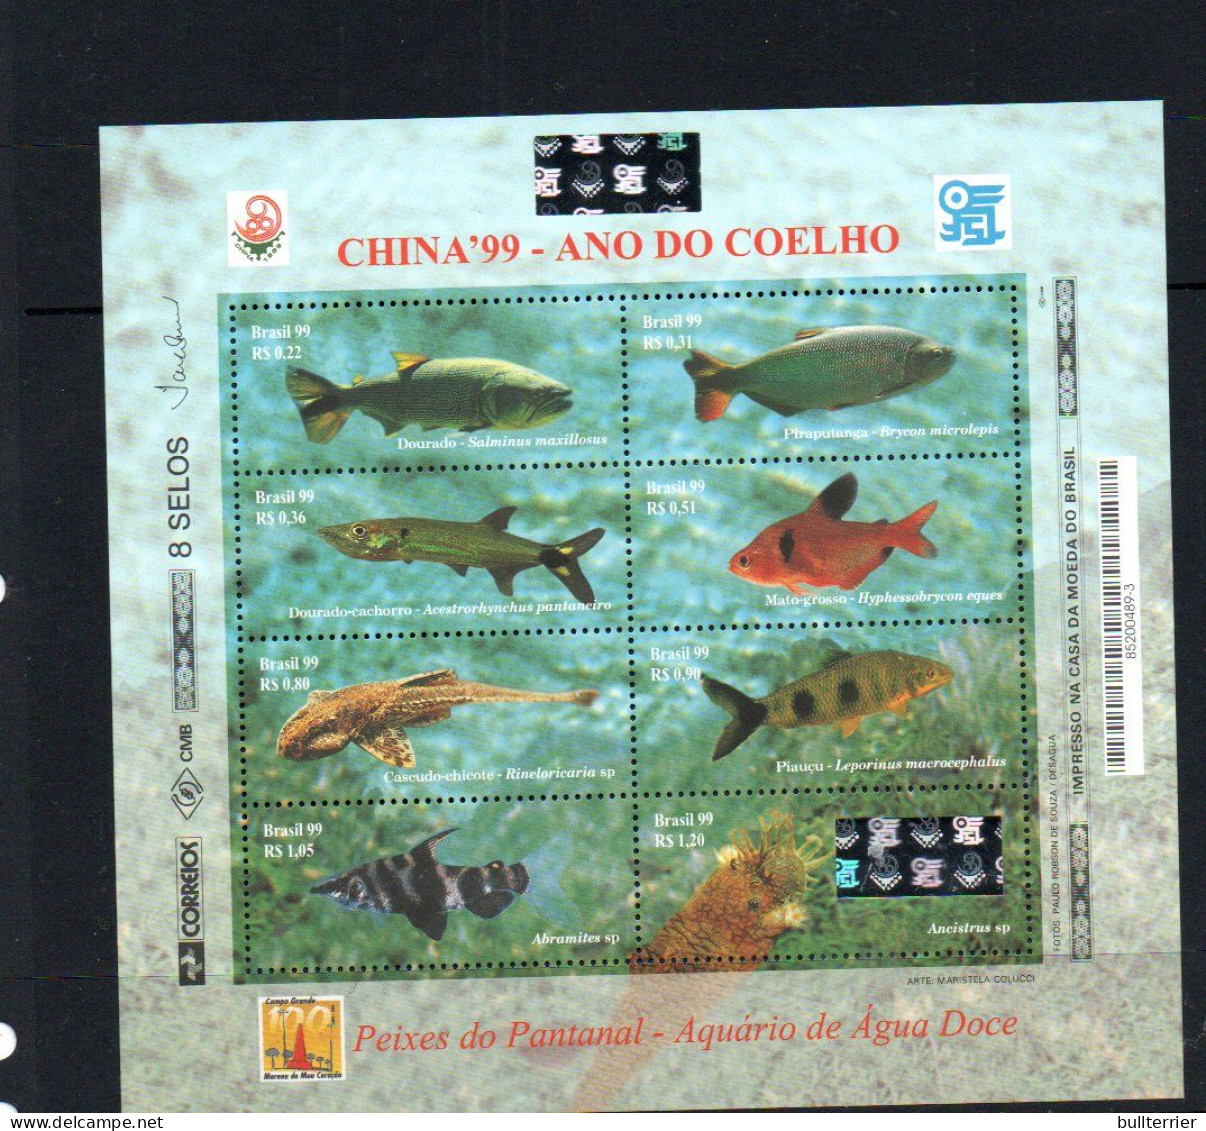 HOLOGRAMS - BRAZIL - 1999- CHINA EXPO FISHES SHEETLET OF 8 MINT NEVER HINGED - Hologramas